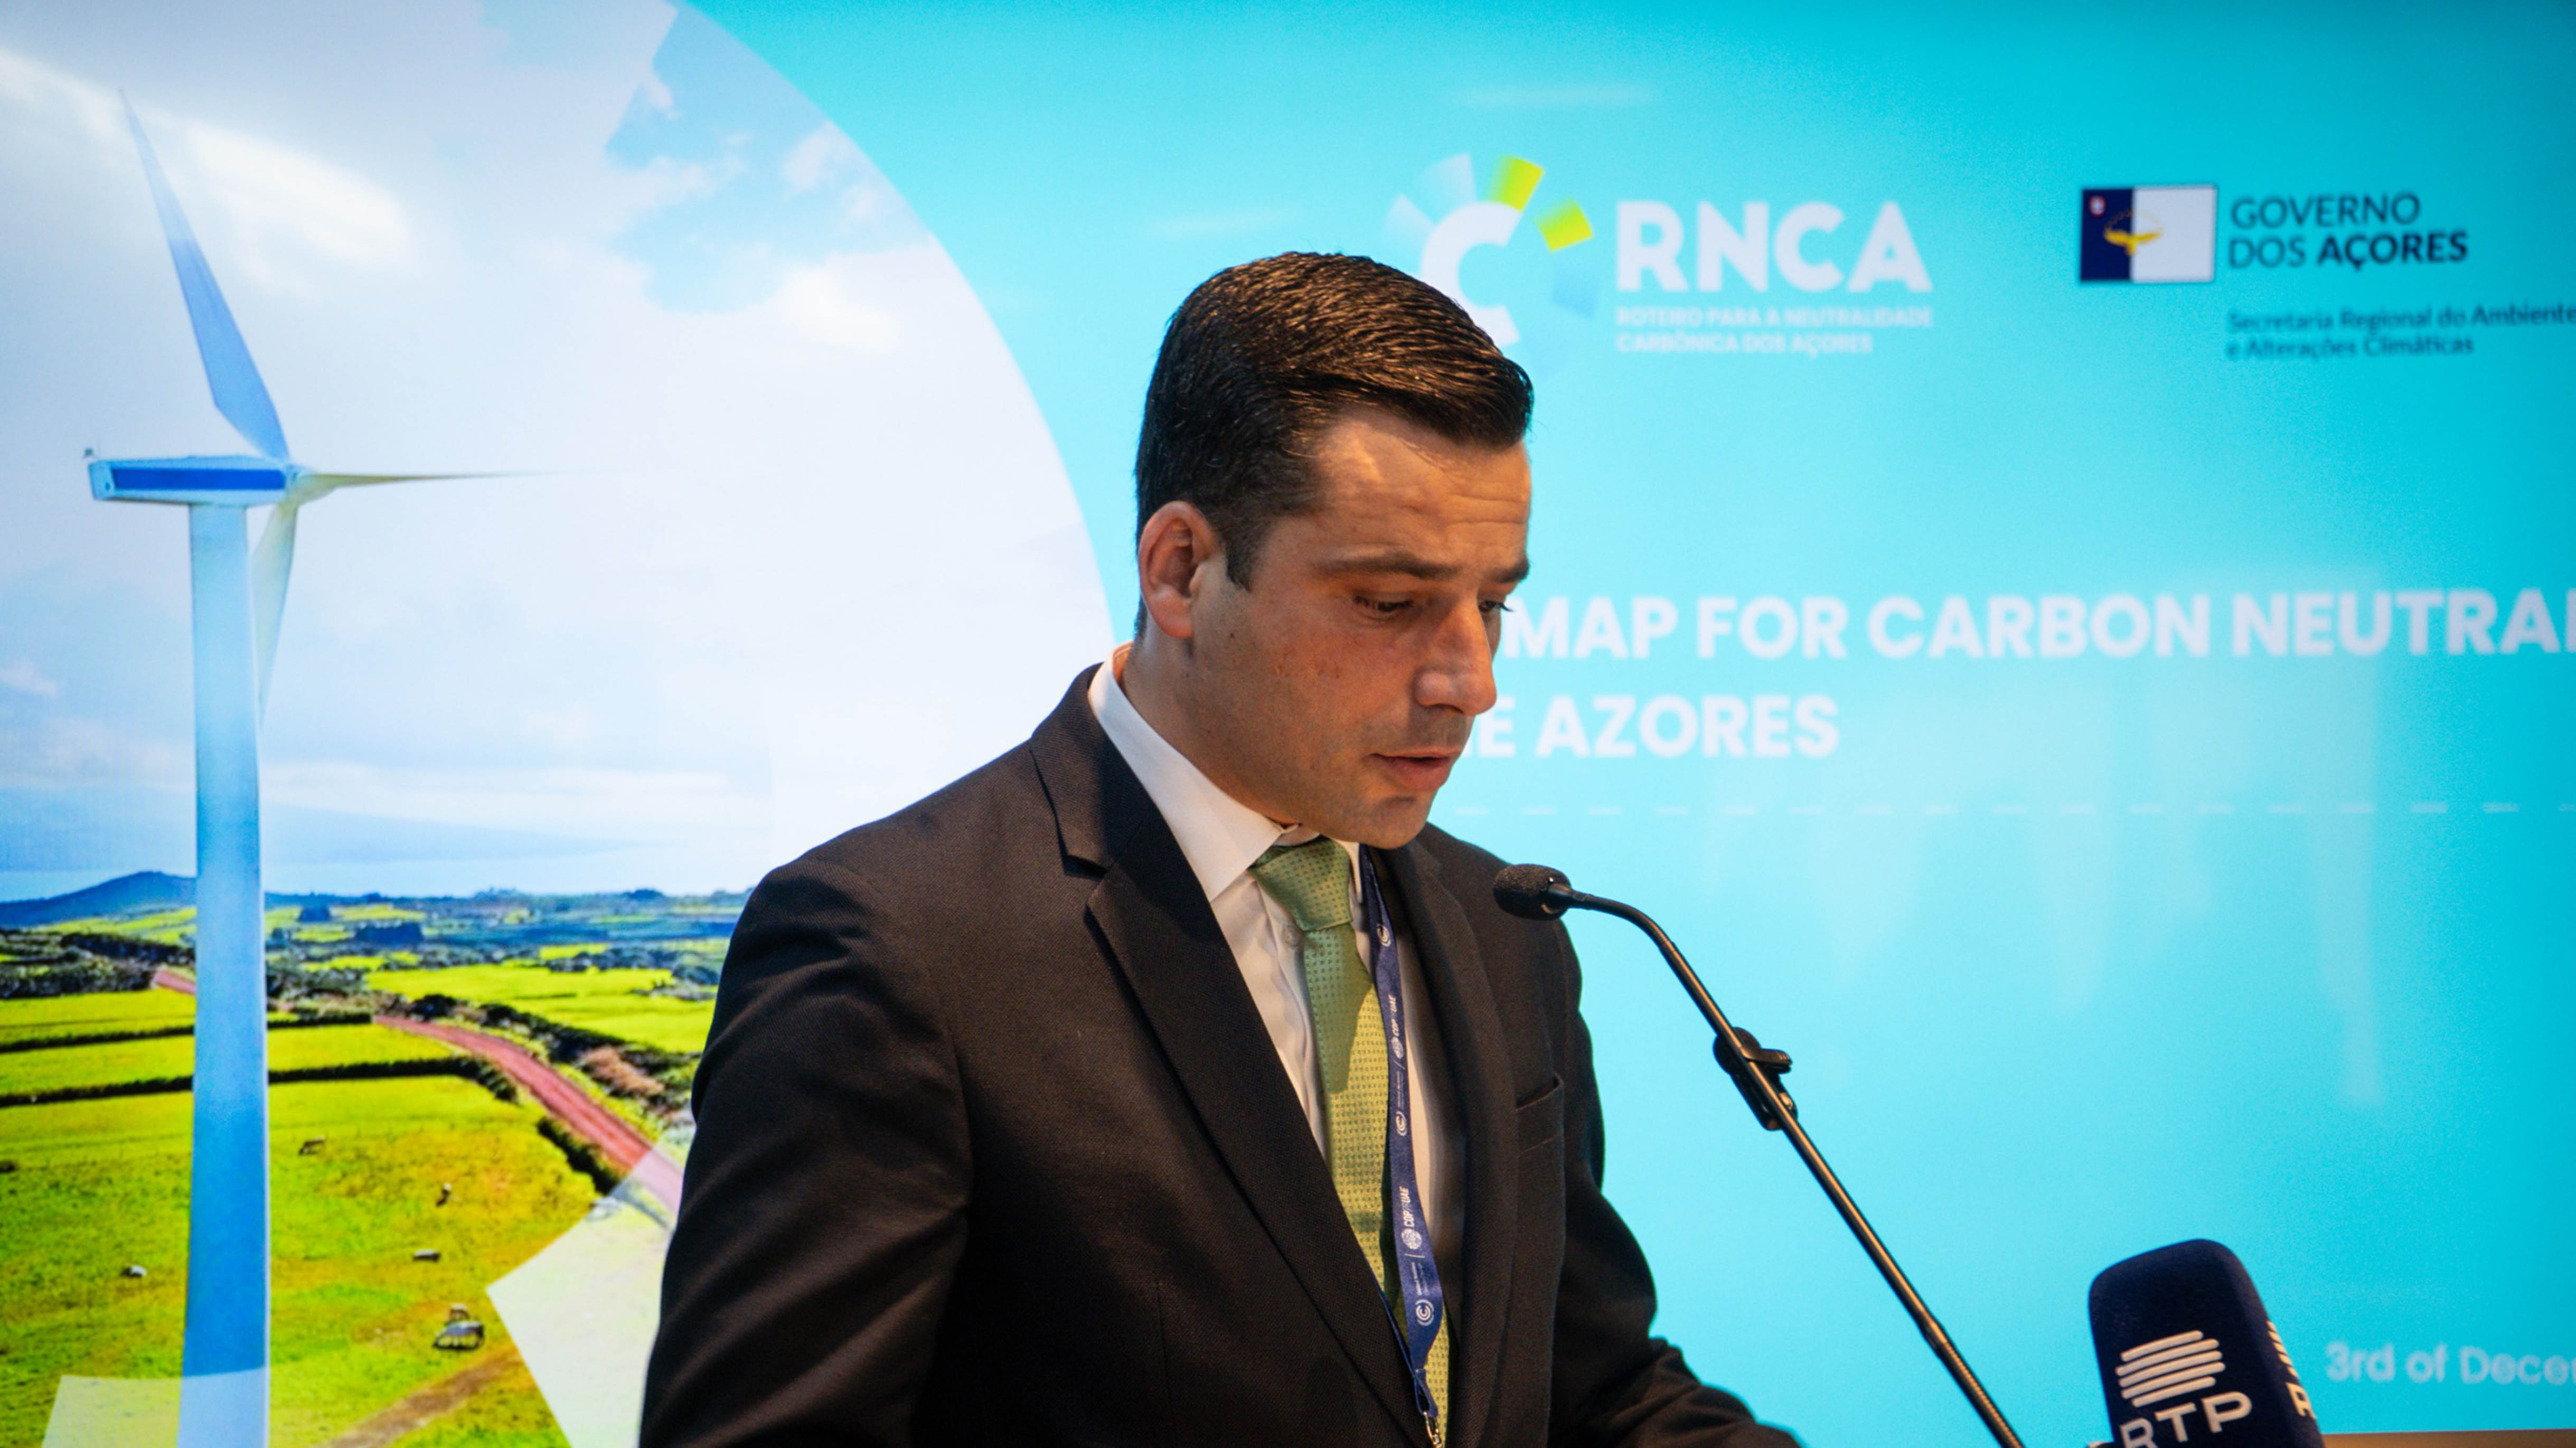 Regional Government presented the Roadmap for Carbon Neutrality in the Azores at COP 28